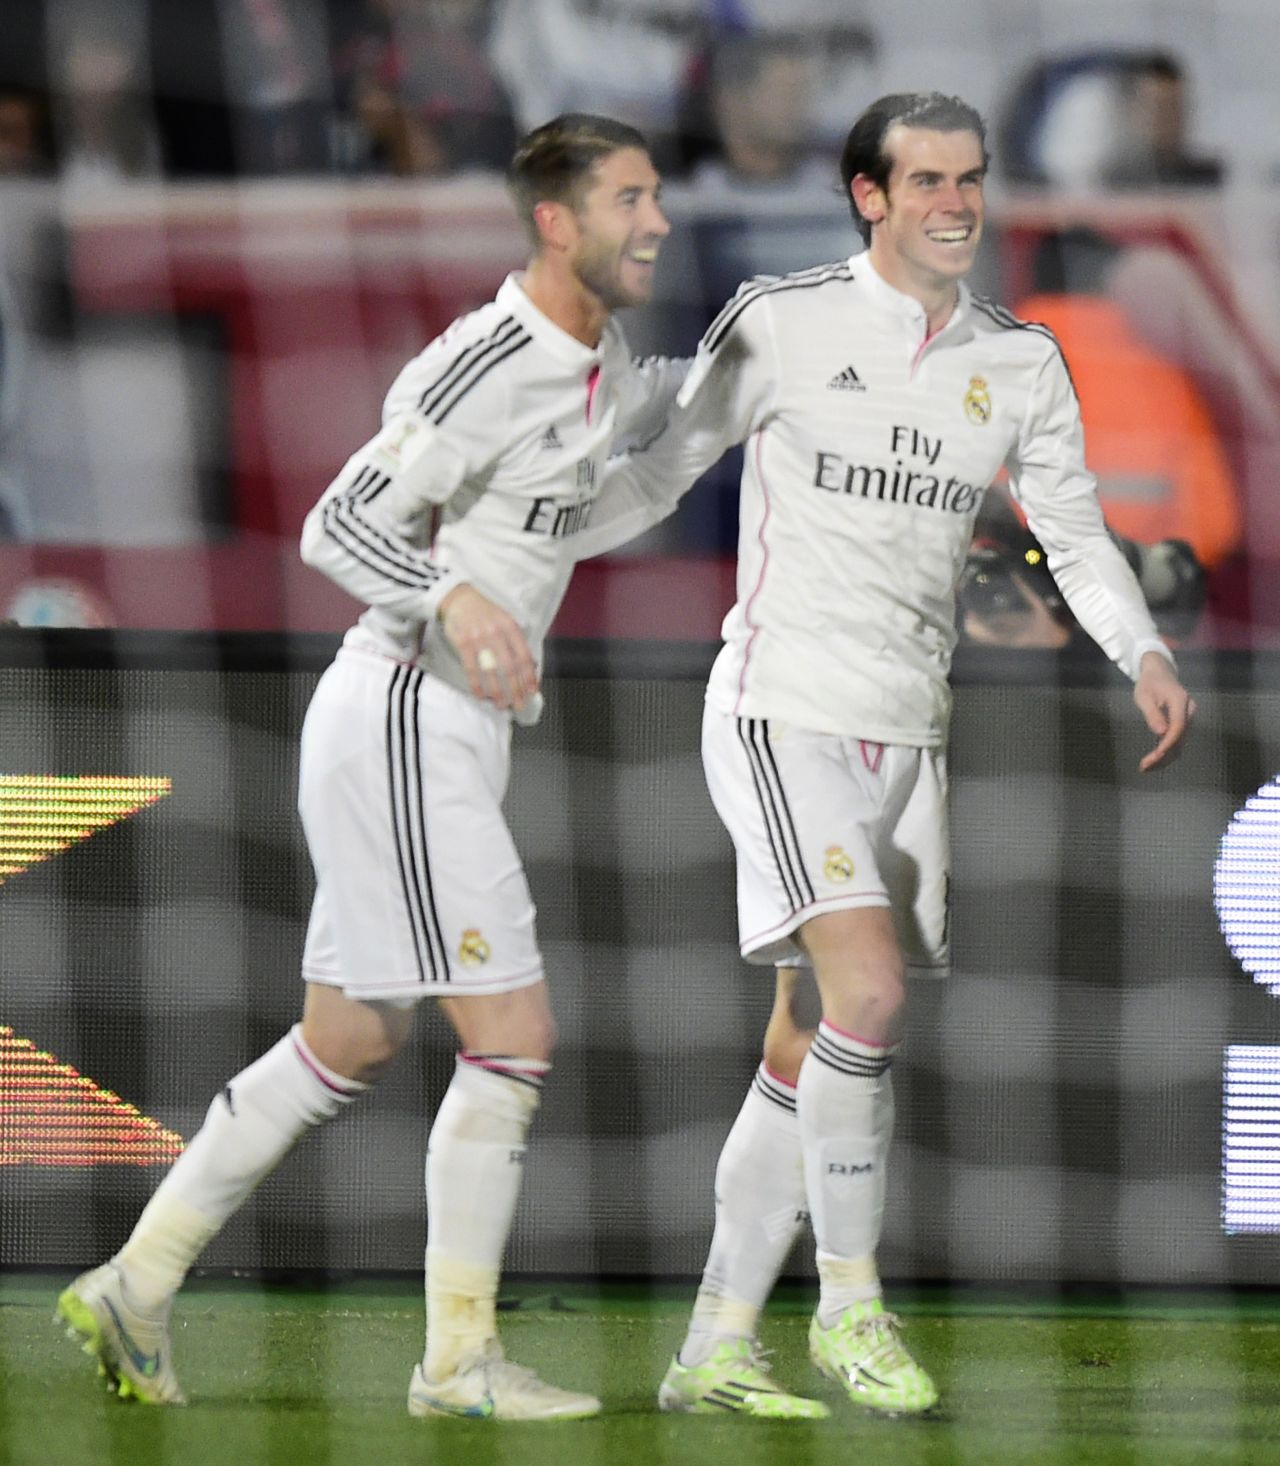 But the smiles are soon back for Real Madrid when Gareth Bale (right) scores a second goal against San Lorenzo.